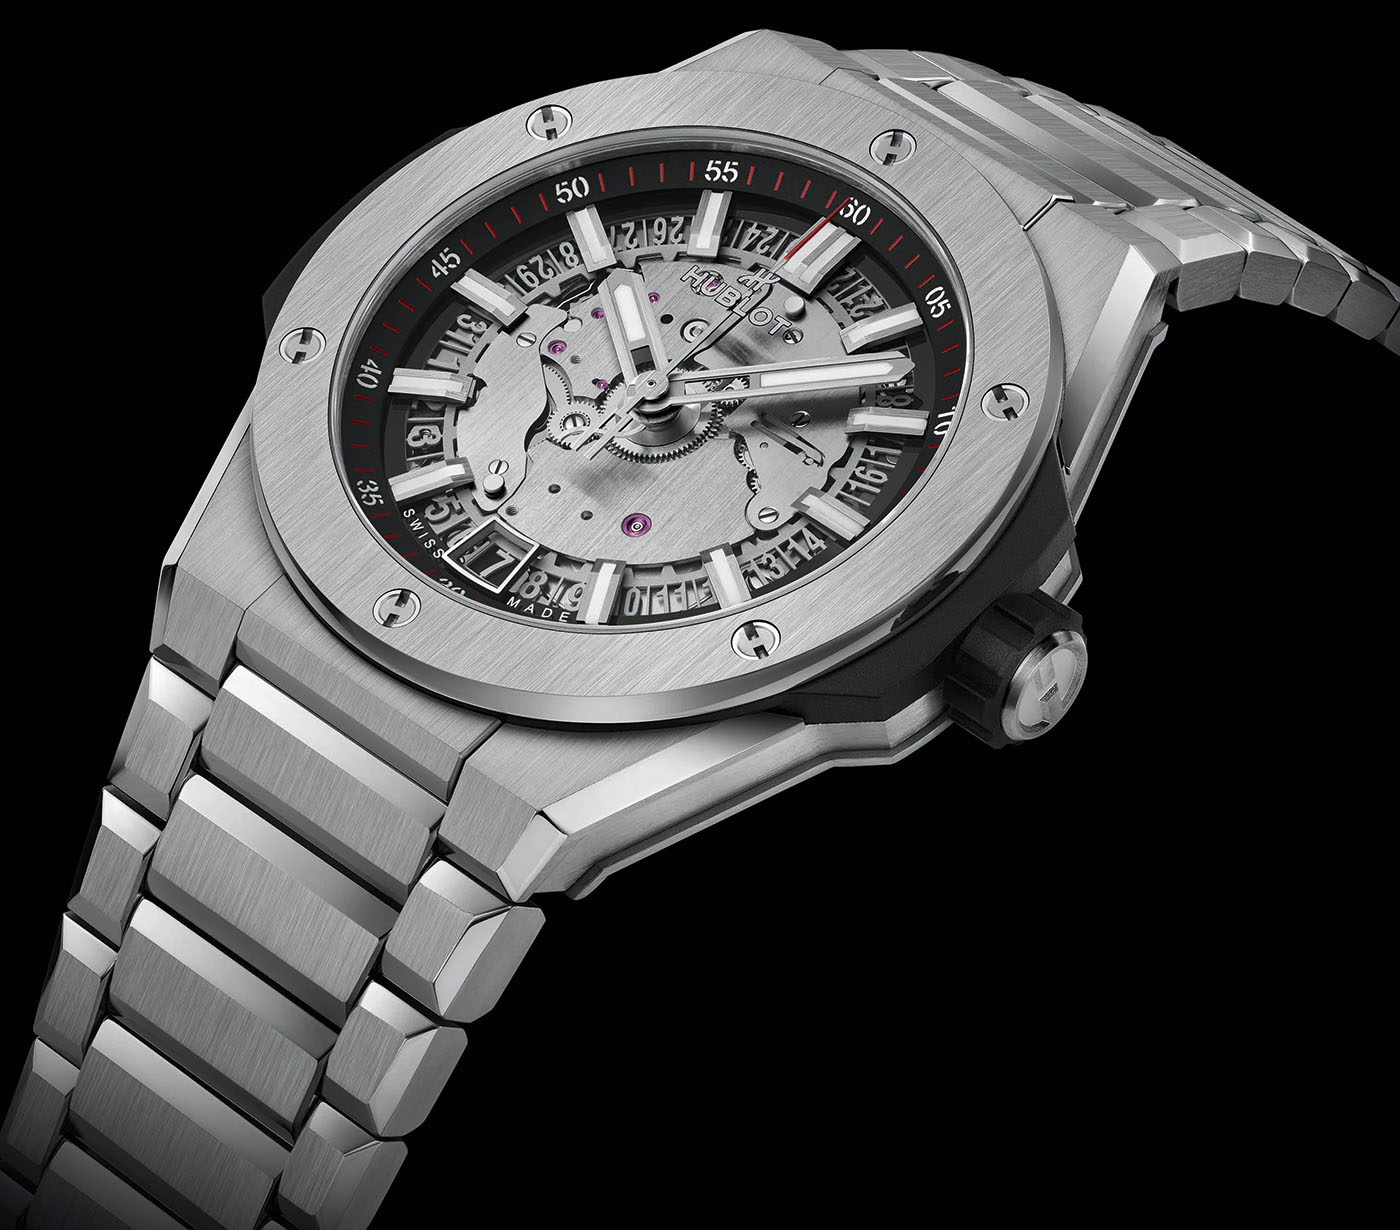 Big Bang Integral Time Only Watches Debut | aBlogtoWatch